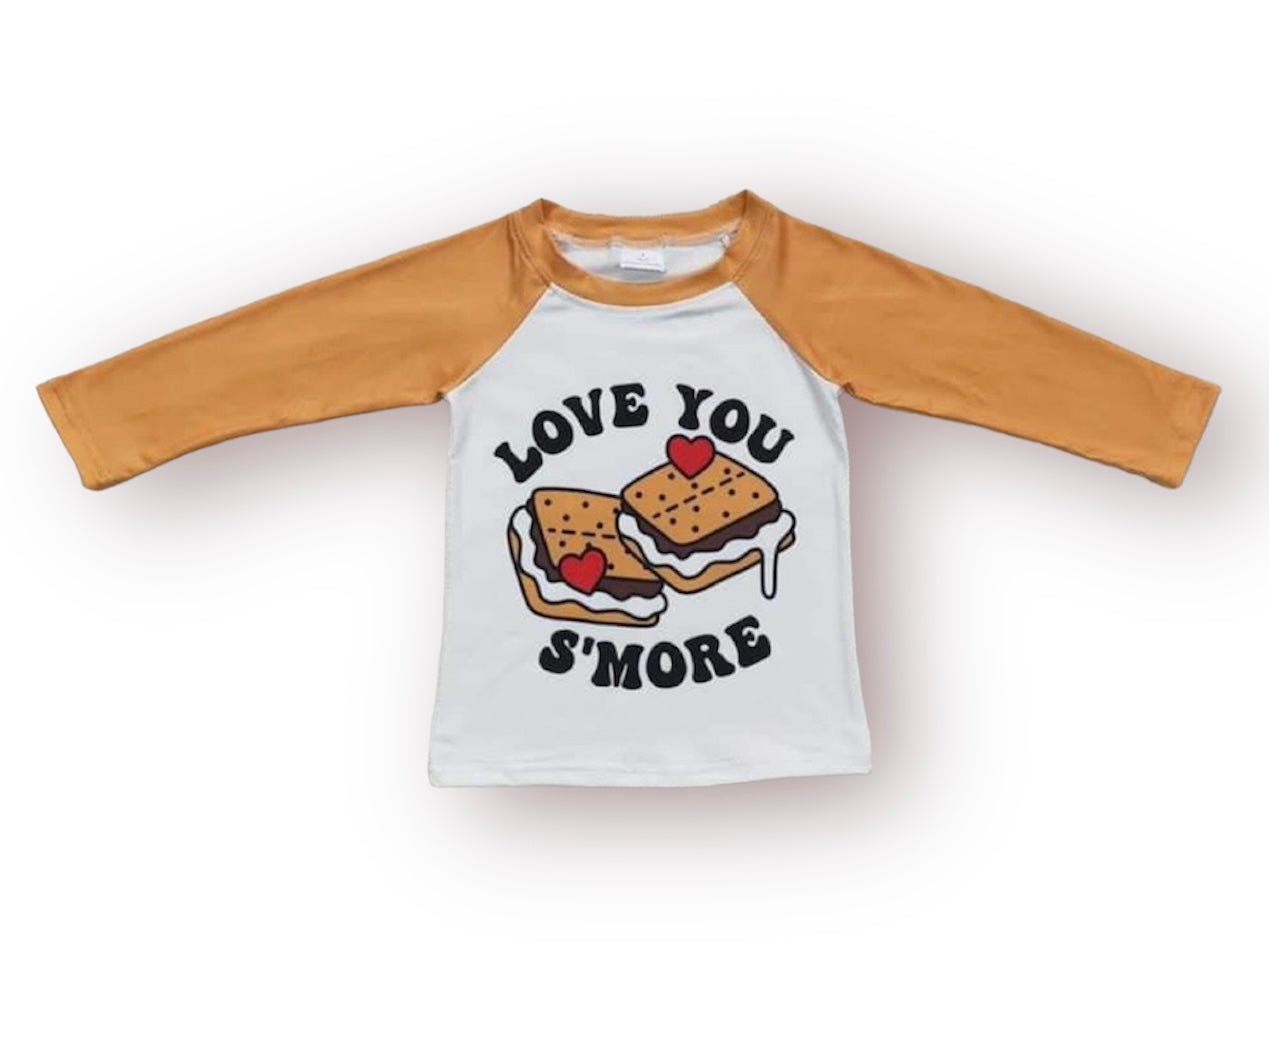 Love Smore Shirt SHIPS IN 10-20 BIZ DAYS AFTER CLOSE